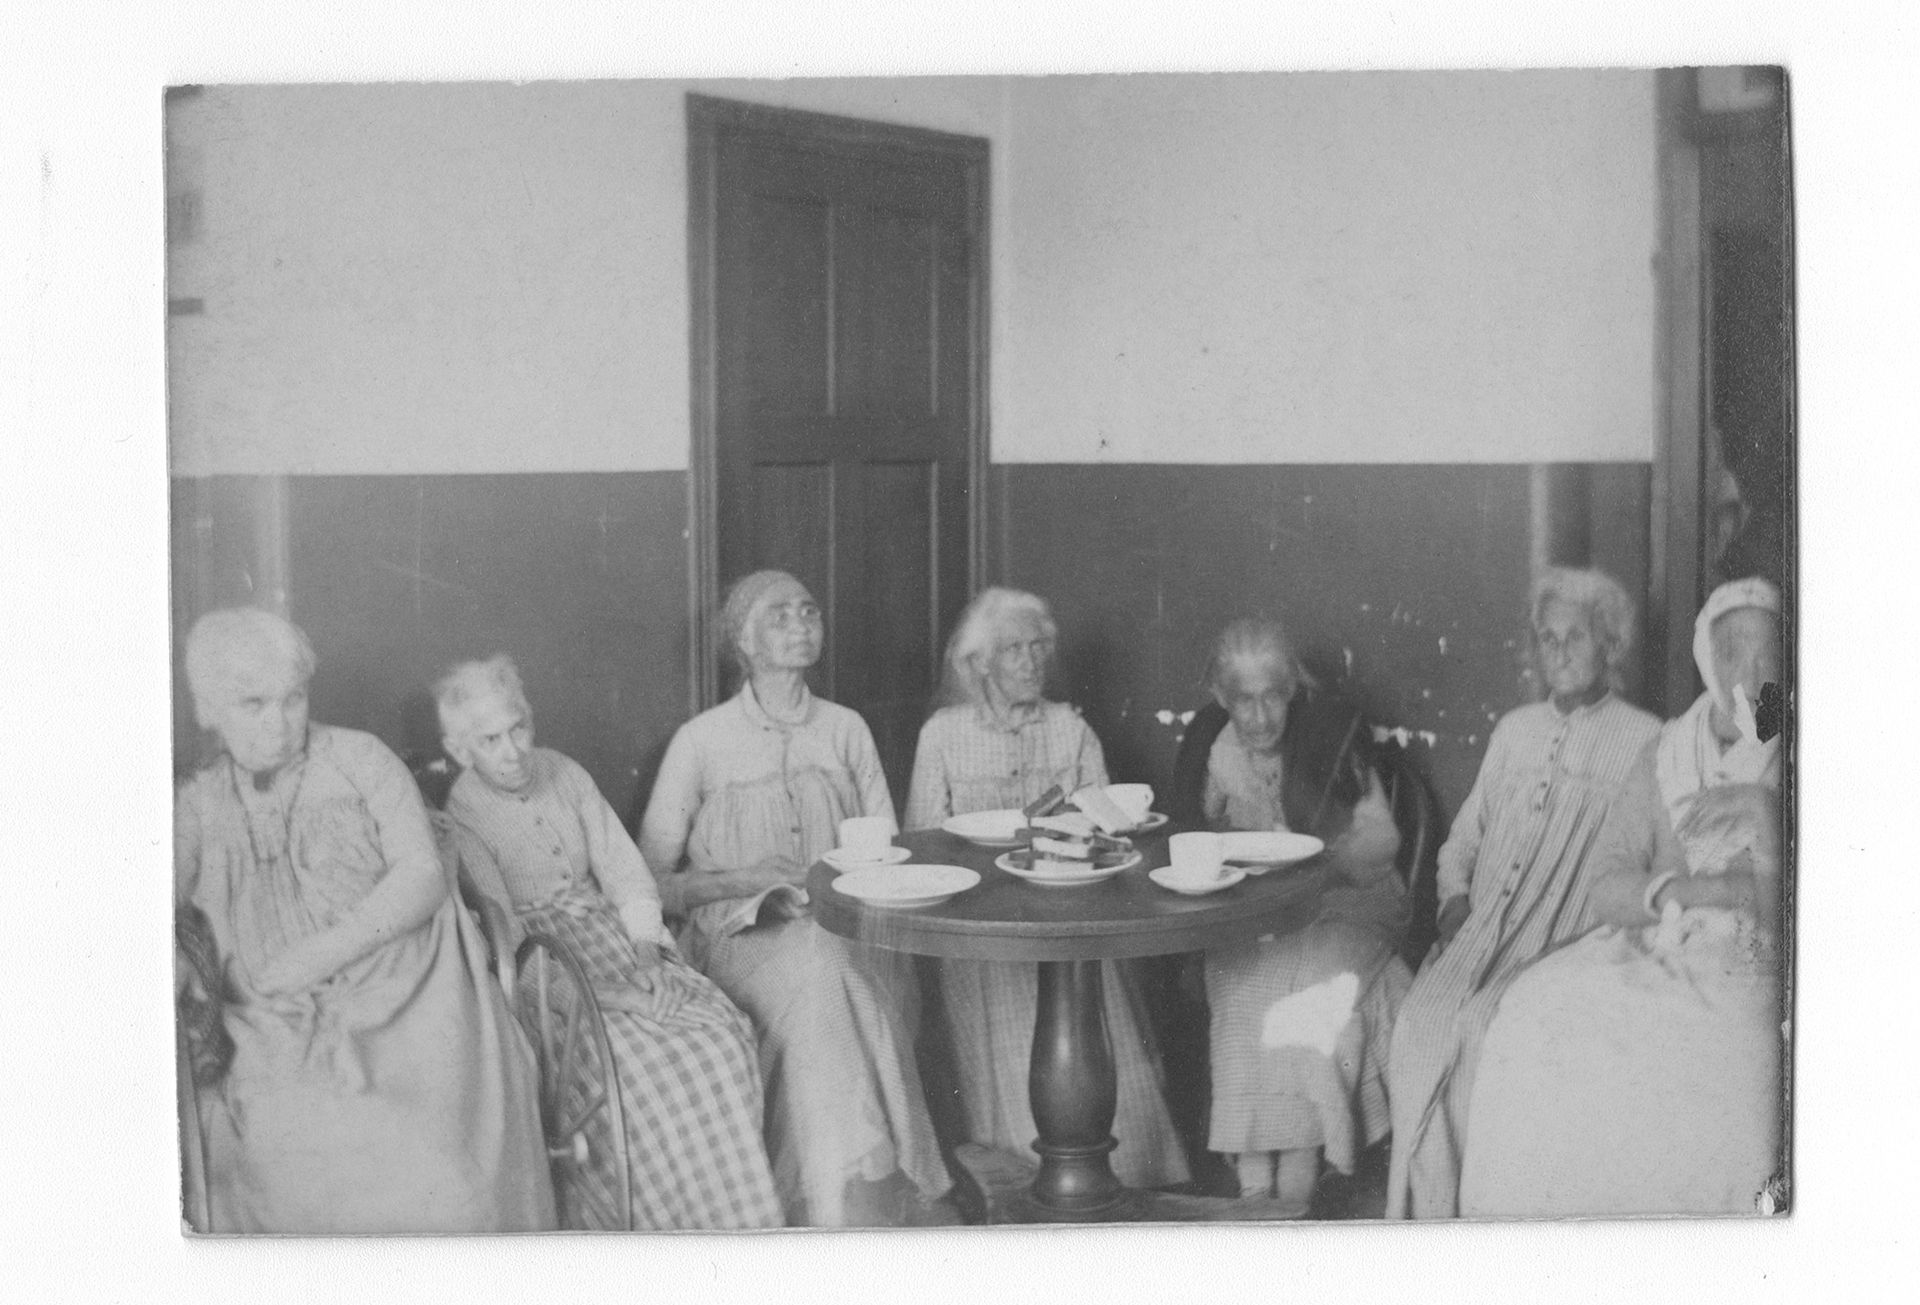 Seven female patients in the &quot;Insane Department&quot; at Philadelphia General Hospital sit around a small table.